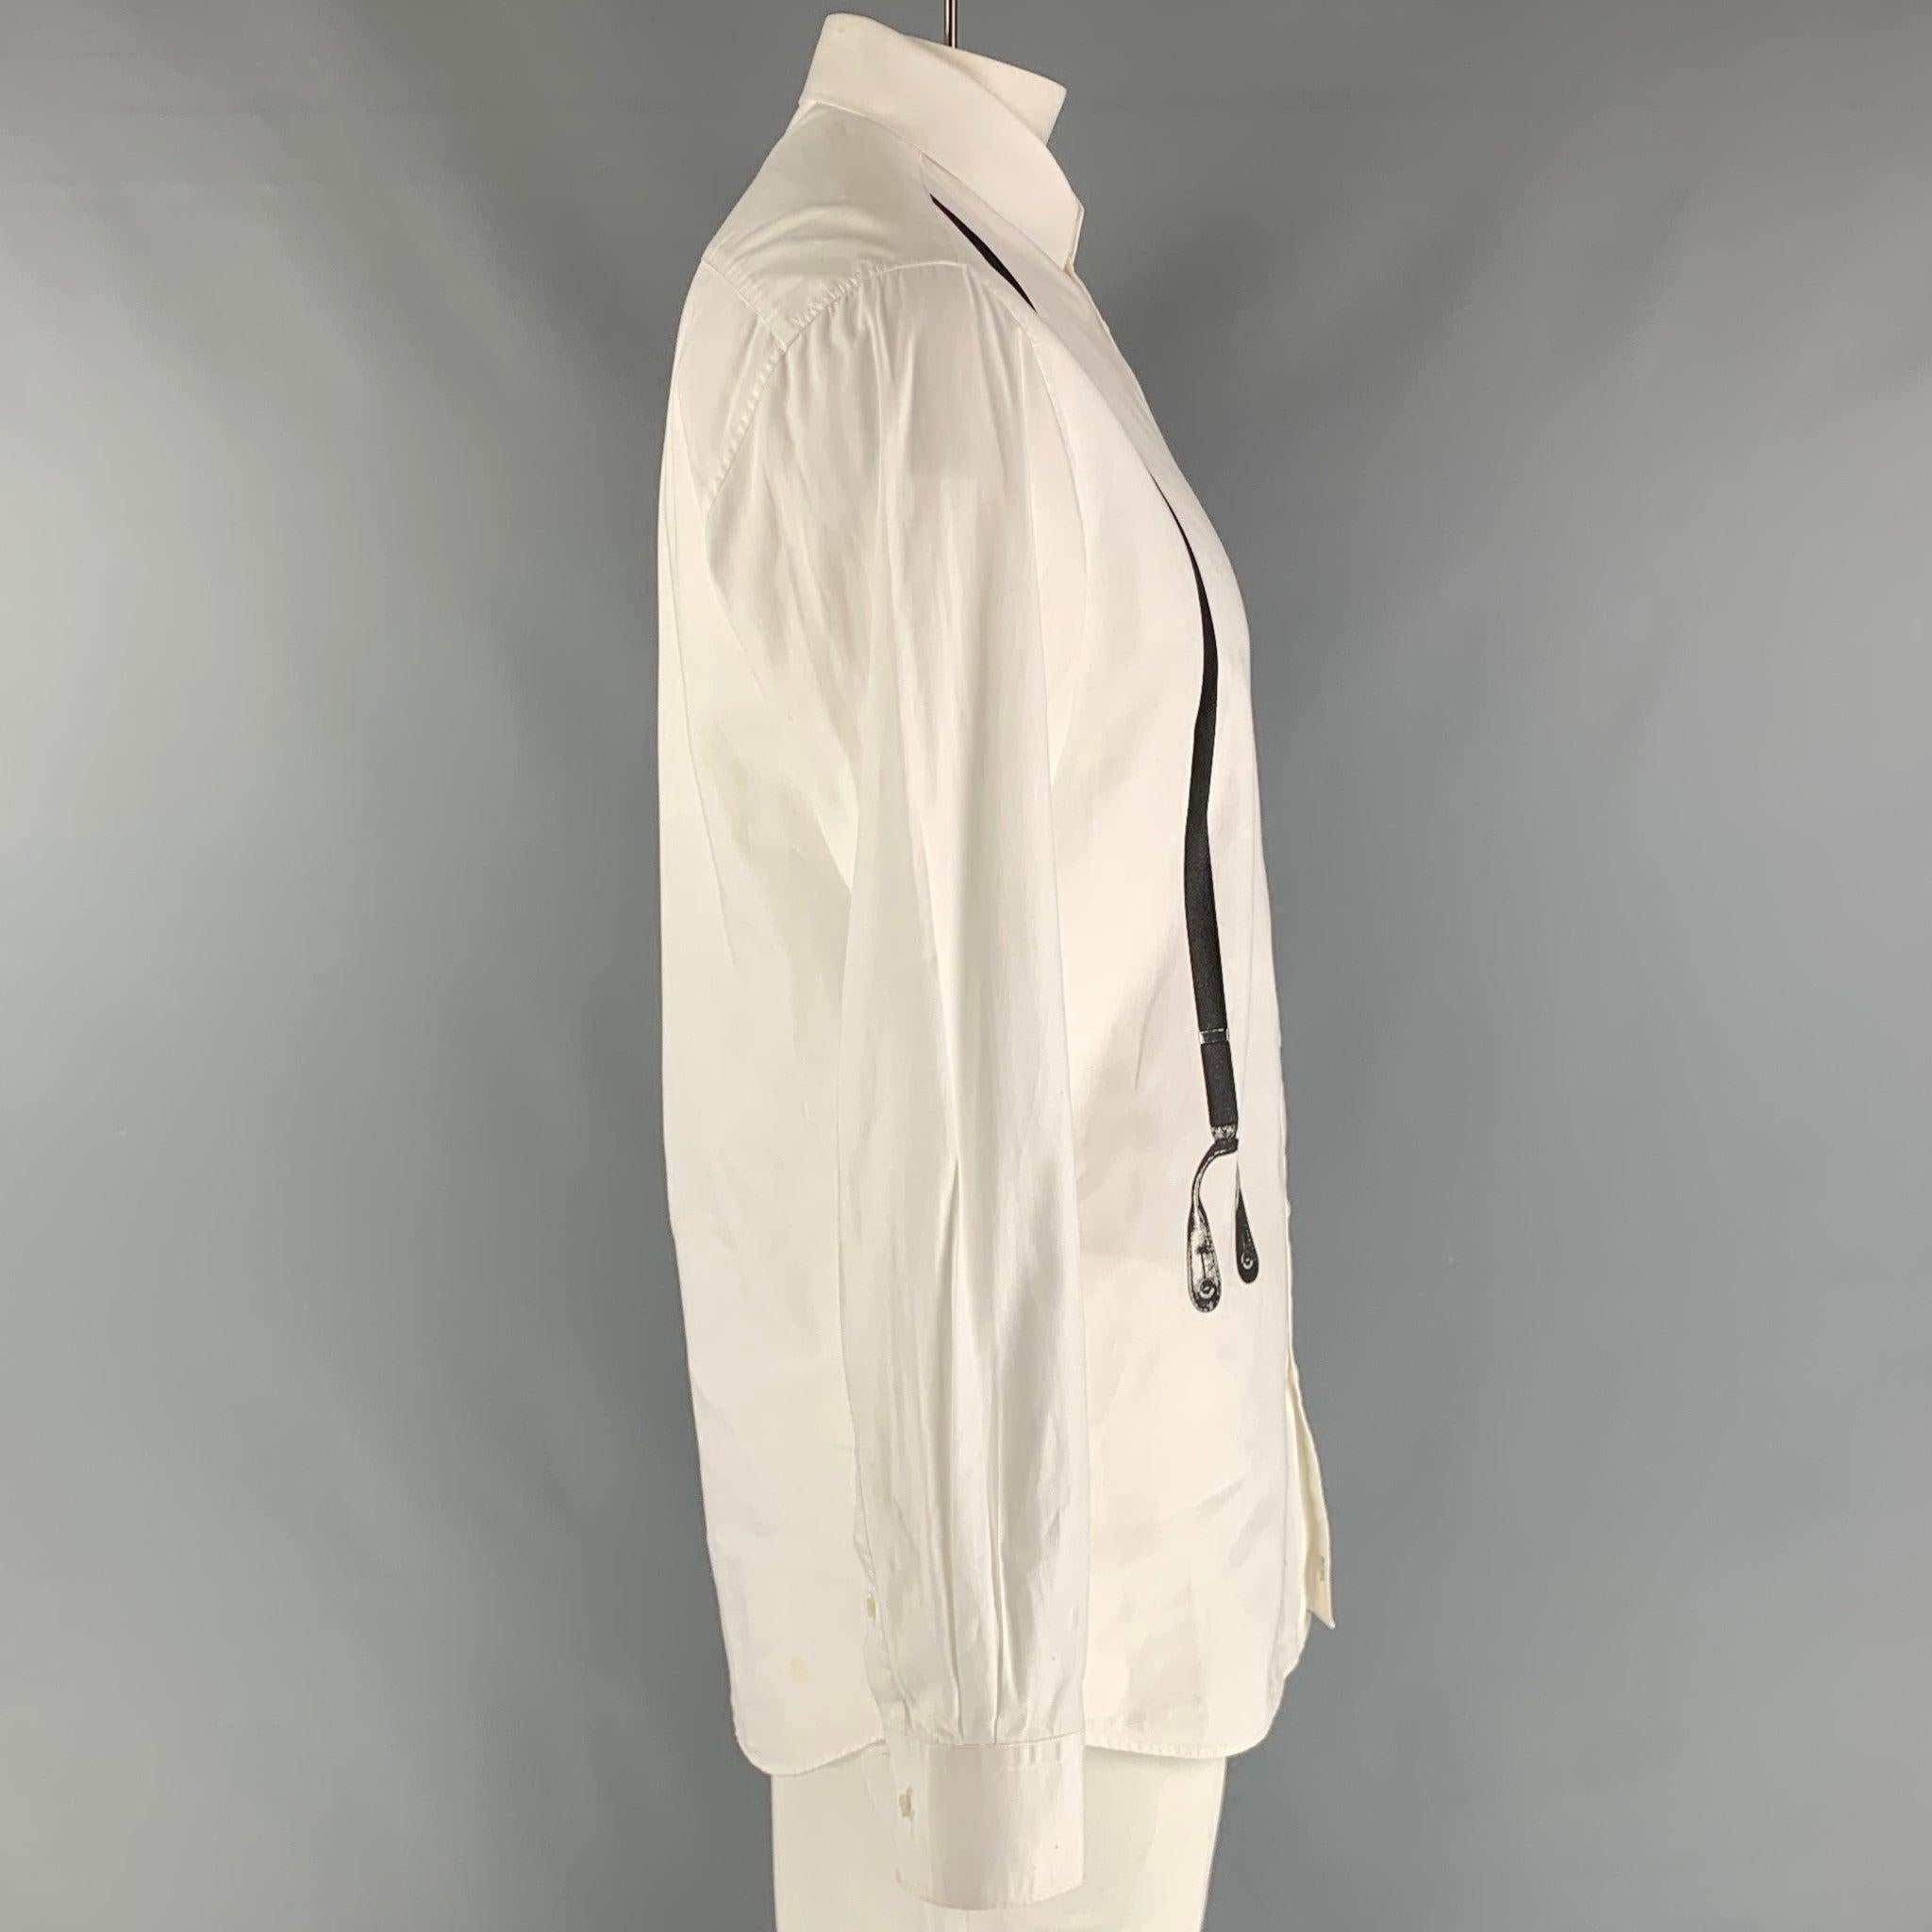 NEIL BARRETT 'slim fit' long sleeve shirt comes in a white cotton featuring a black suspenders print at front, spread collar, and buttons closure. Made in Italy.Good Pre-Owned Condition. Moderate wear. Discolorations through out. 

Marked:   42- 18